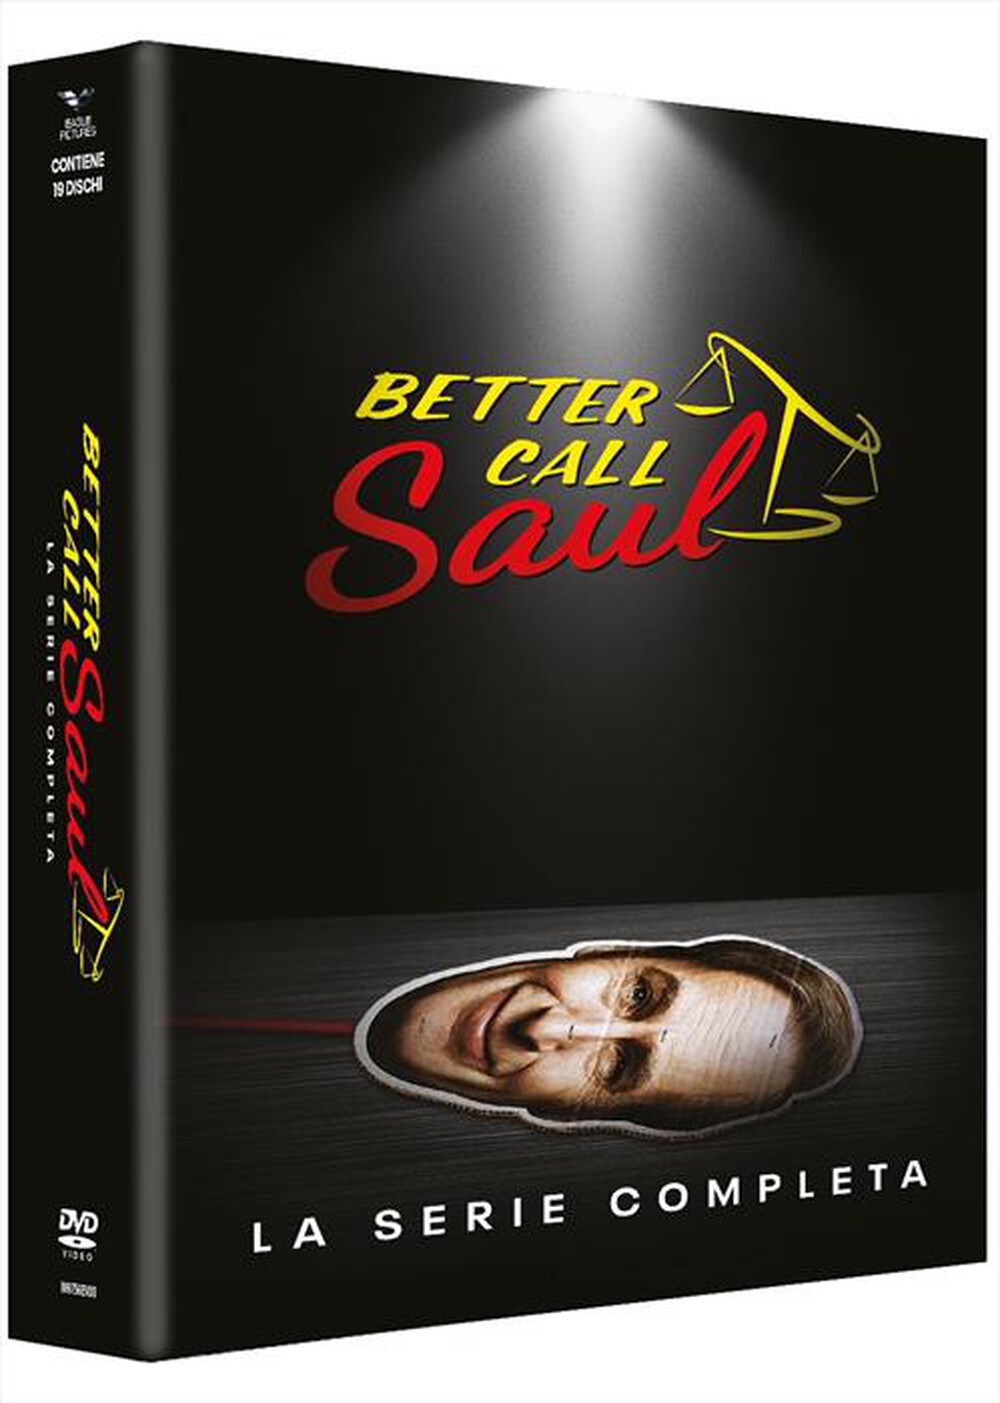 "SONY PICTURES - Better Call Saul - La Serie Completa (19 Dvd)"